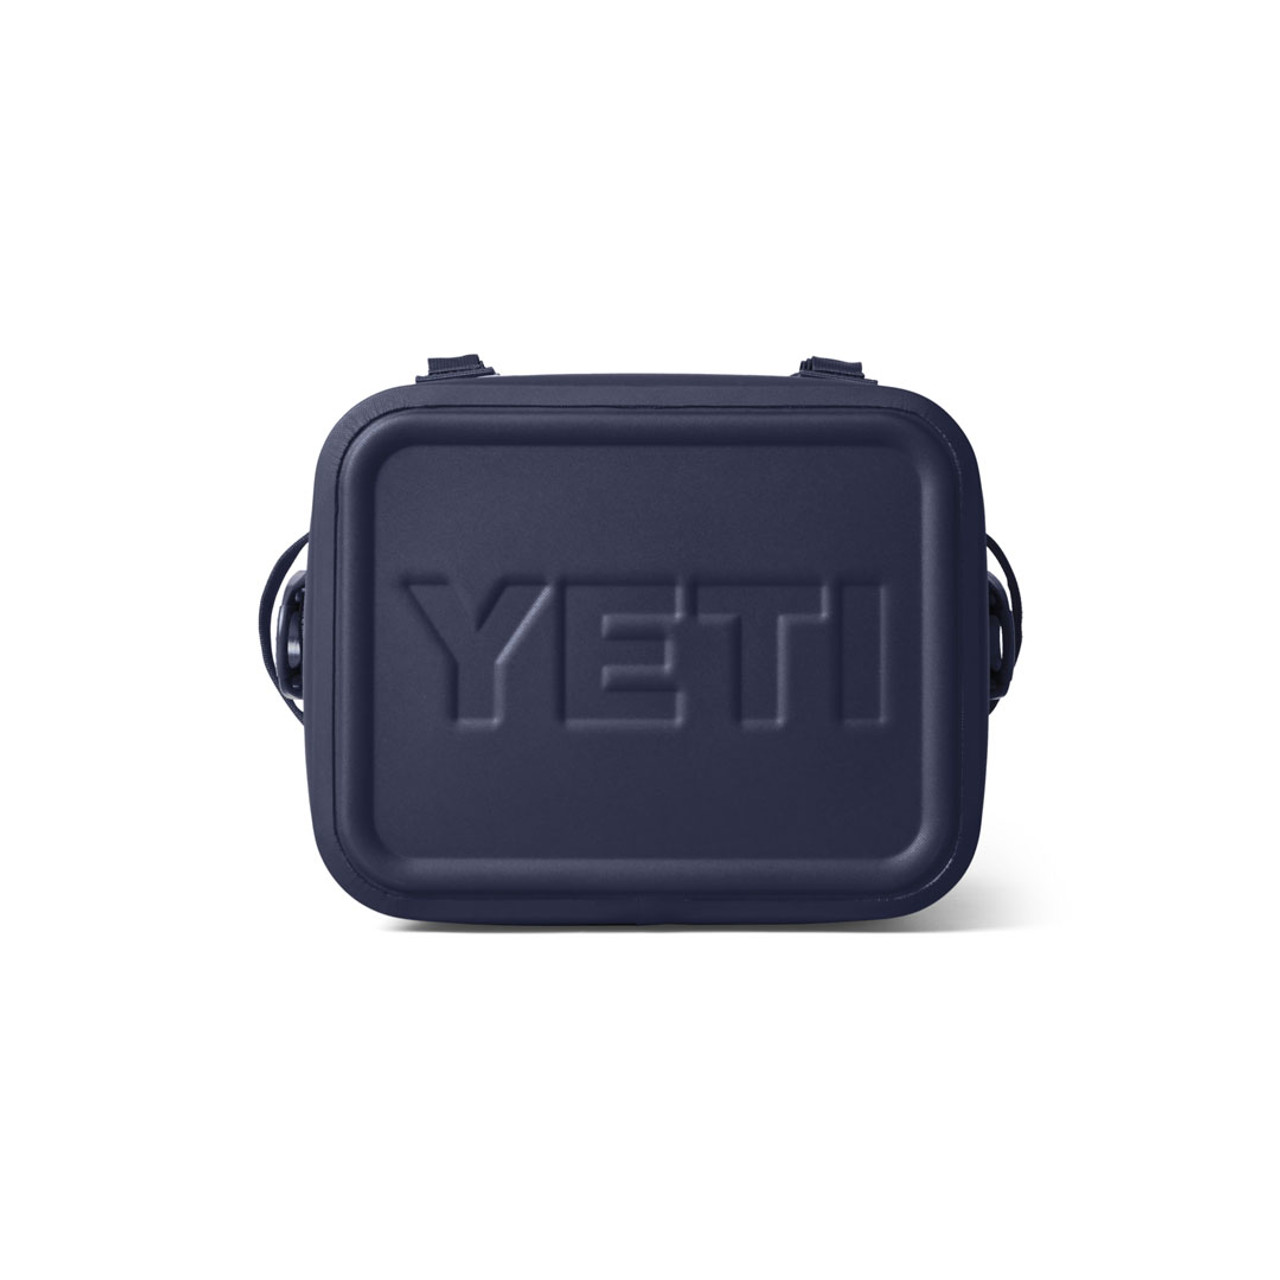 Yeti launches new lilac and green colorways